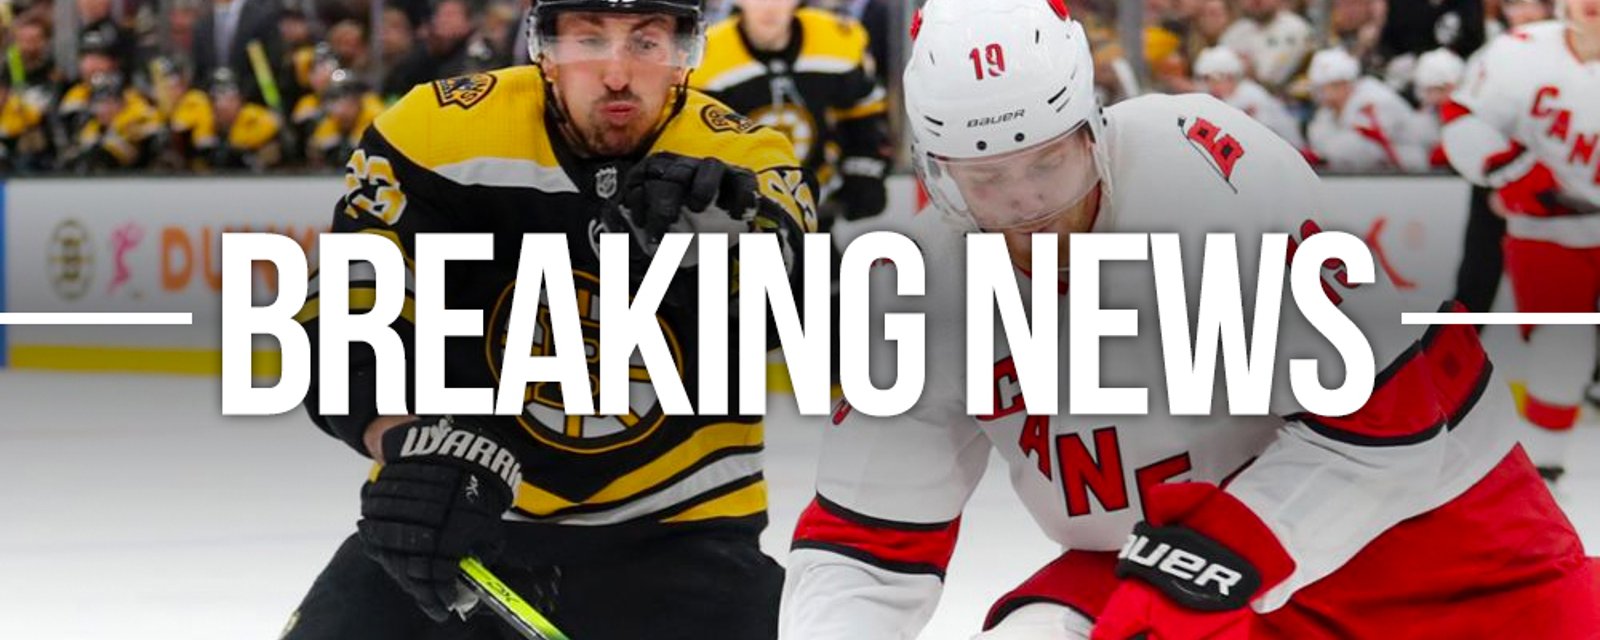 Game 1 between Bruins and Hurricanes officially rescheduled after Lightning and Blue Jackets go to triple OT